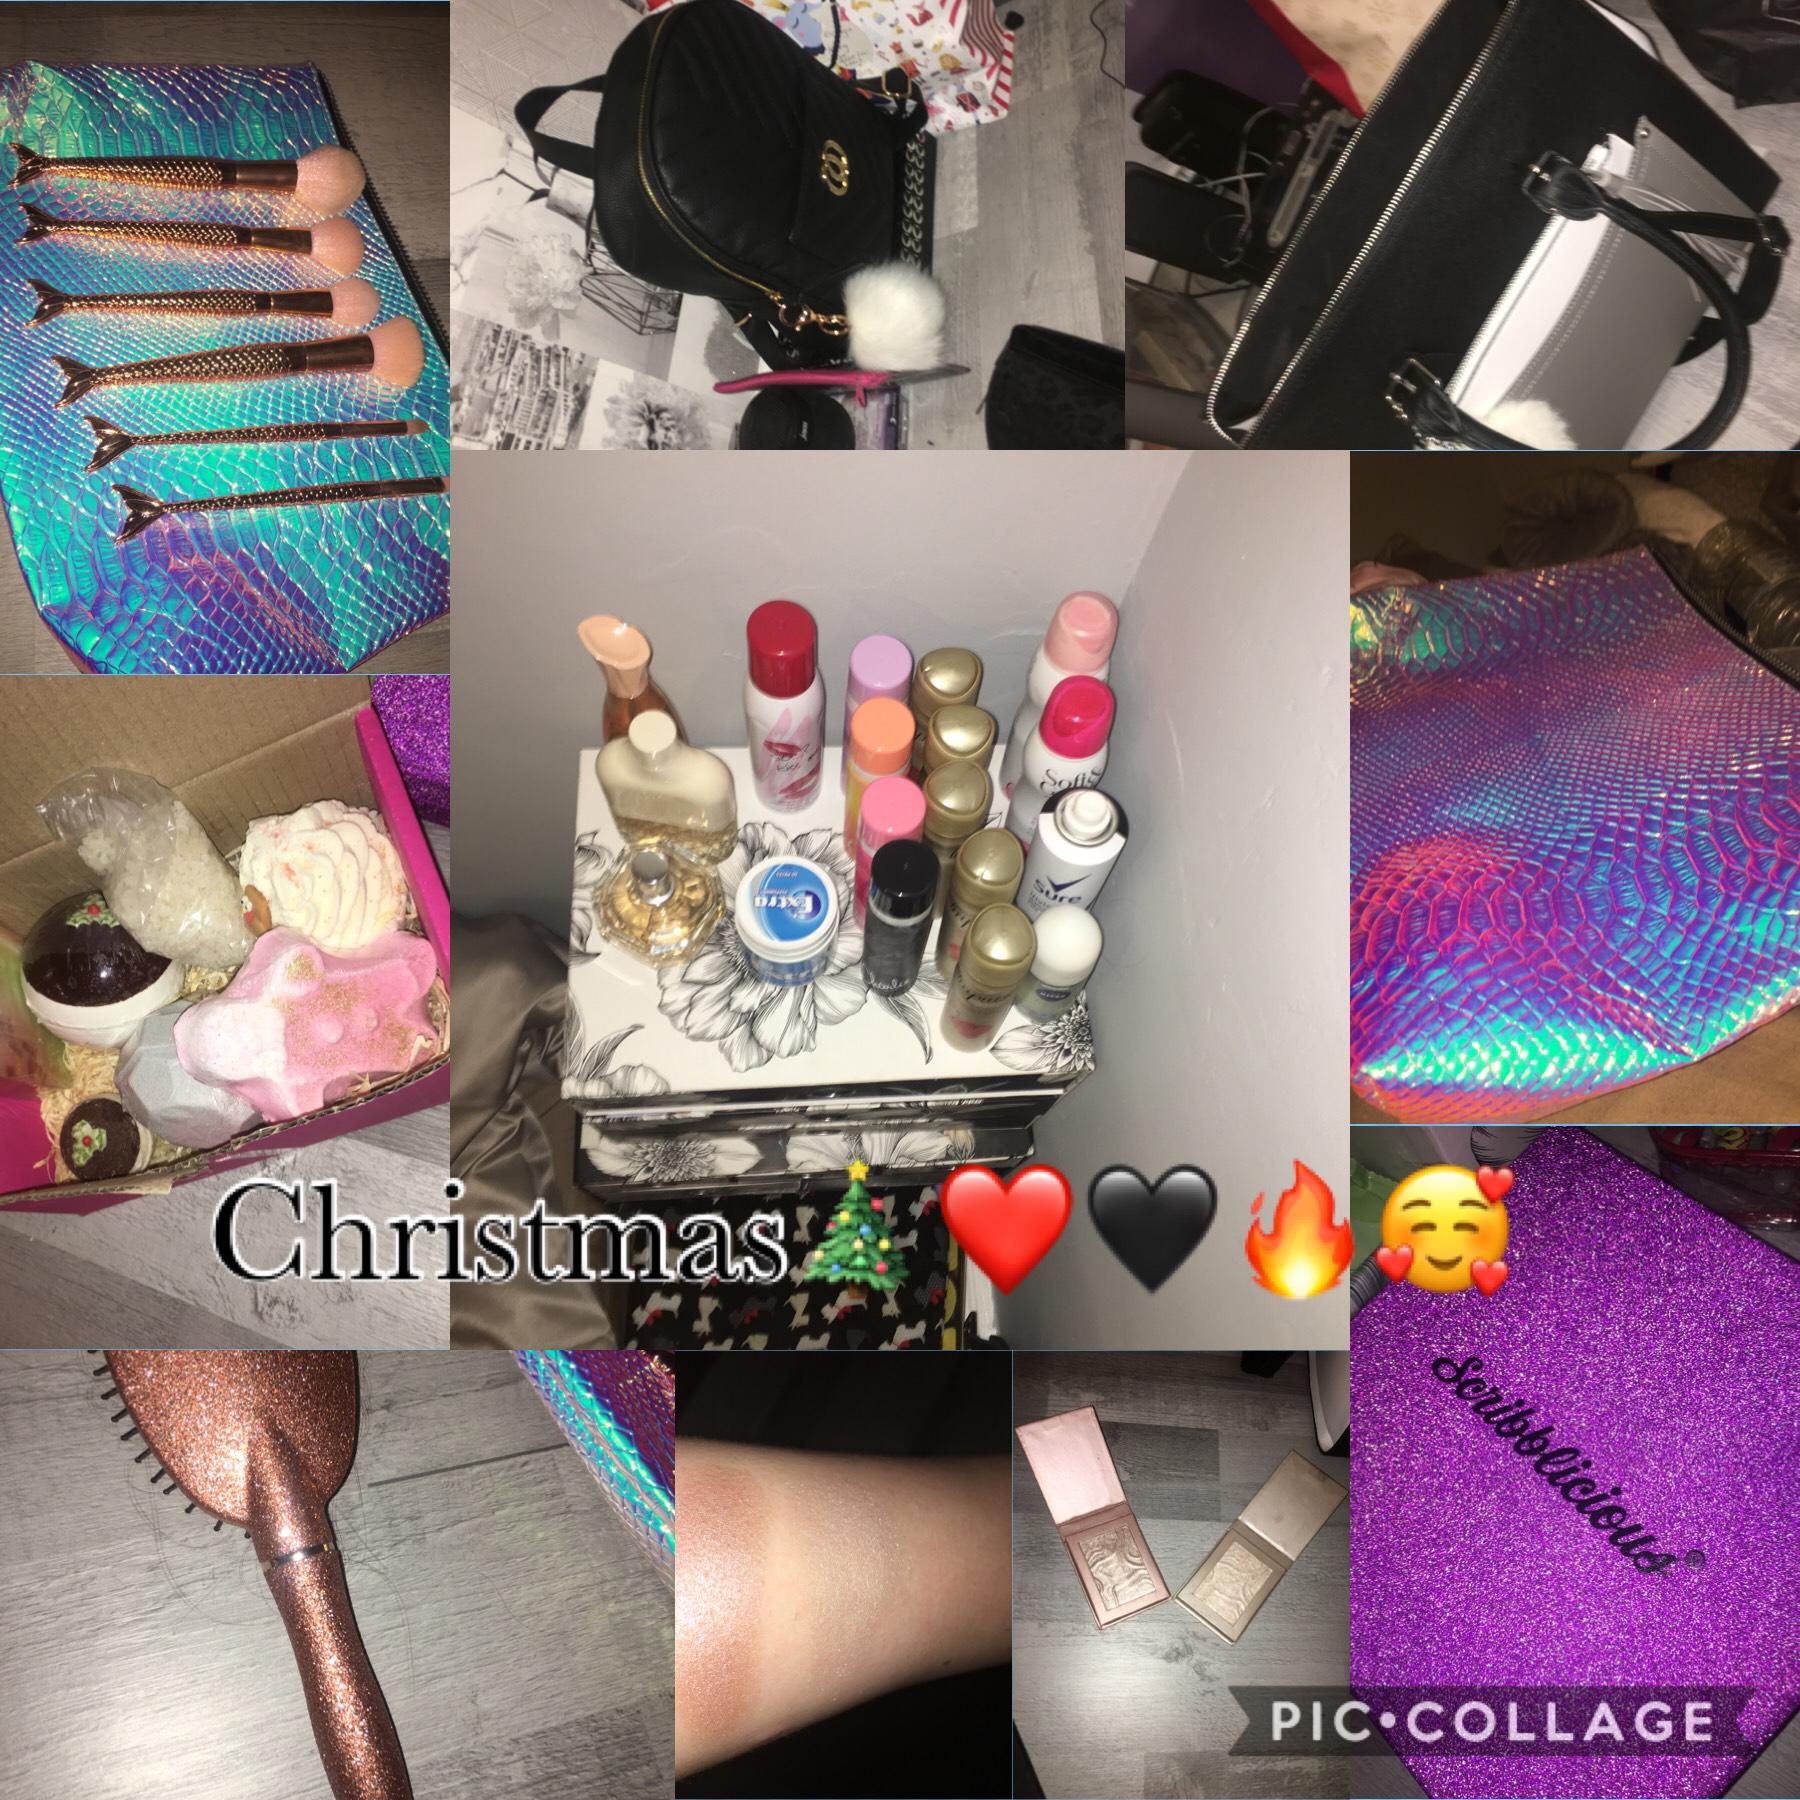 Who loves Christmas time?? Some of my Xmas prezzies and more..🔥😍🥰🖤❤️🖤❤️🎄🎄🎄🎄🎄🎄🎄🎄🎄🎄🎄🎄🎄🎄🎄